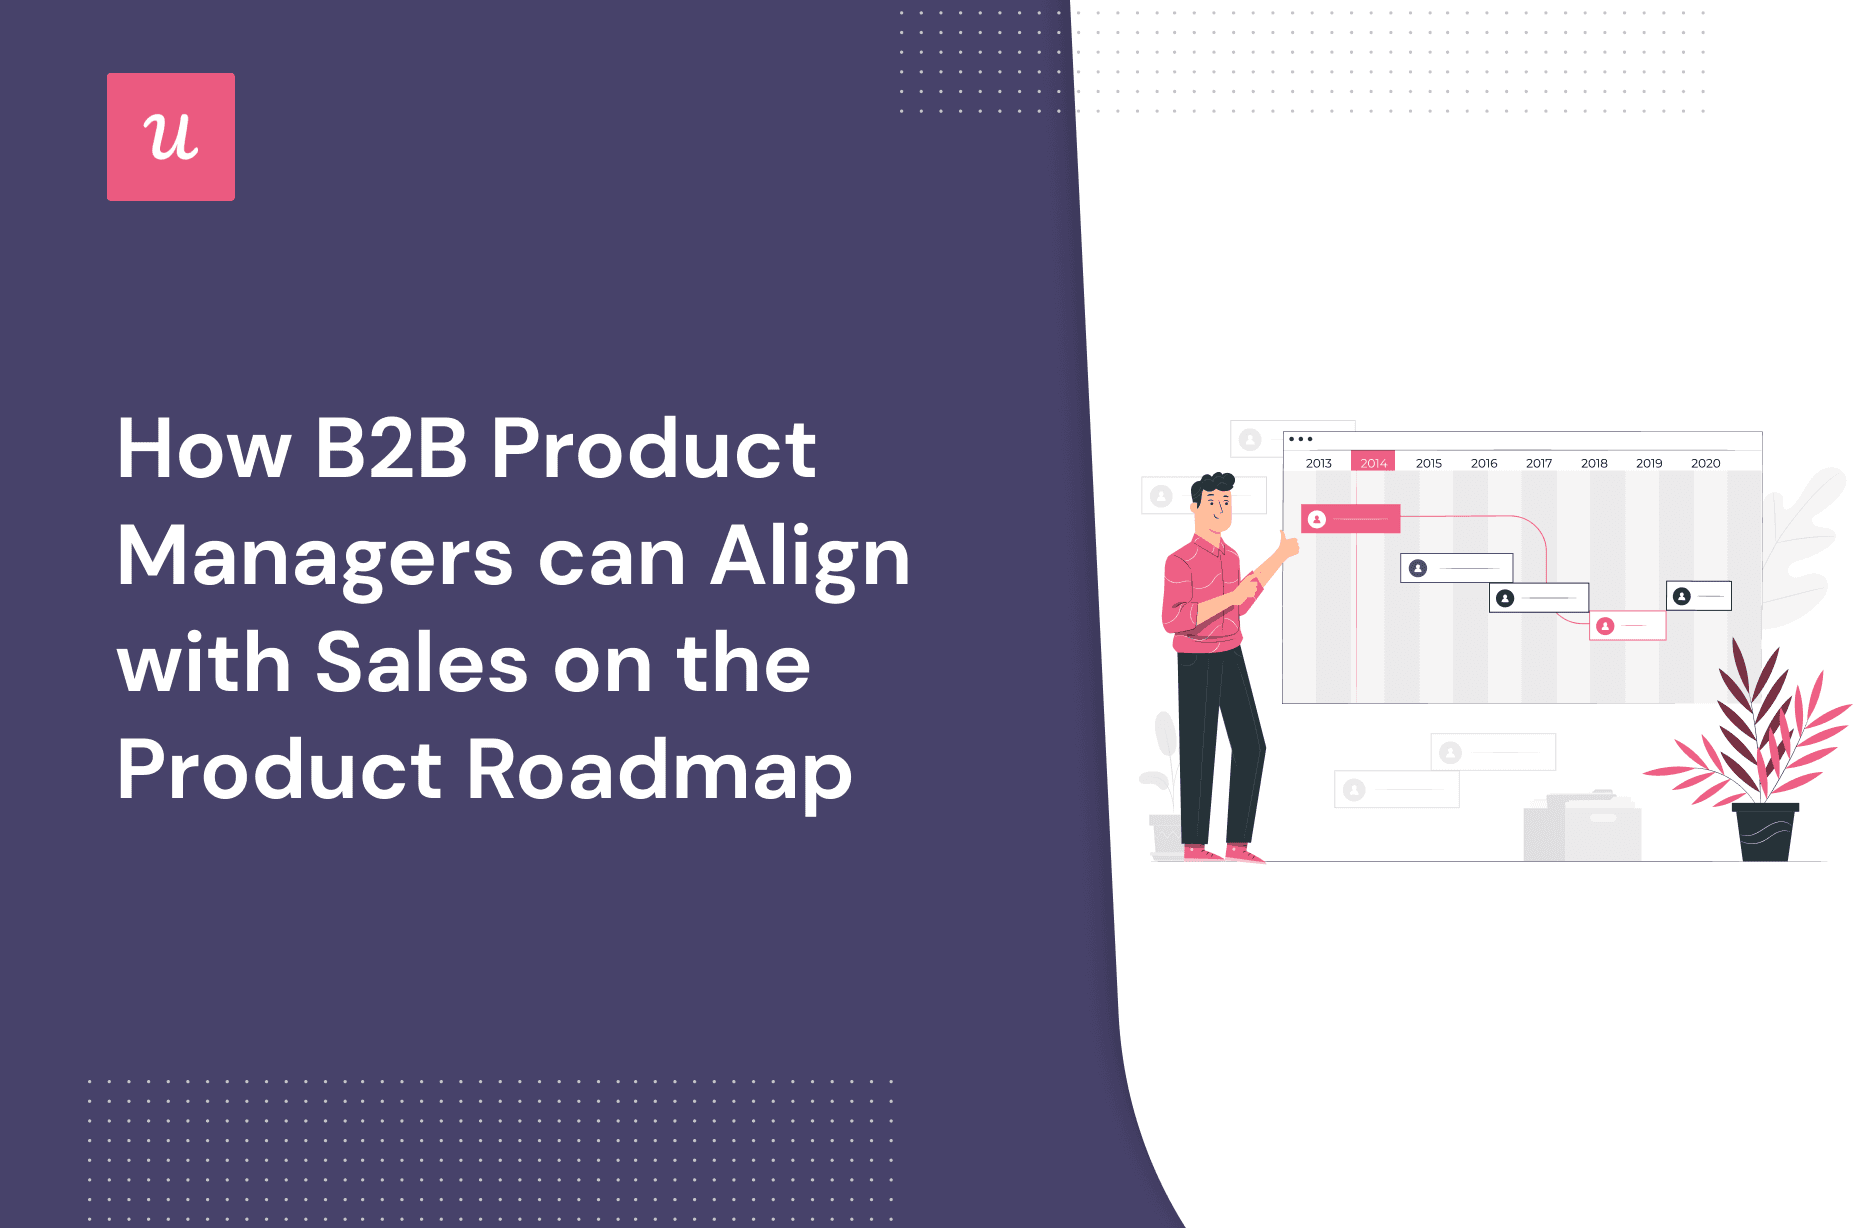 How B2B Product Managers Can Align with Sales On The Product Roadmap